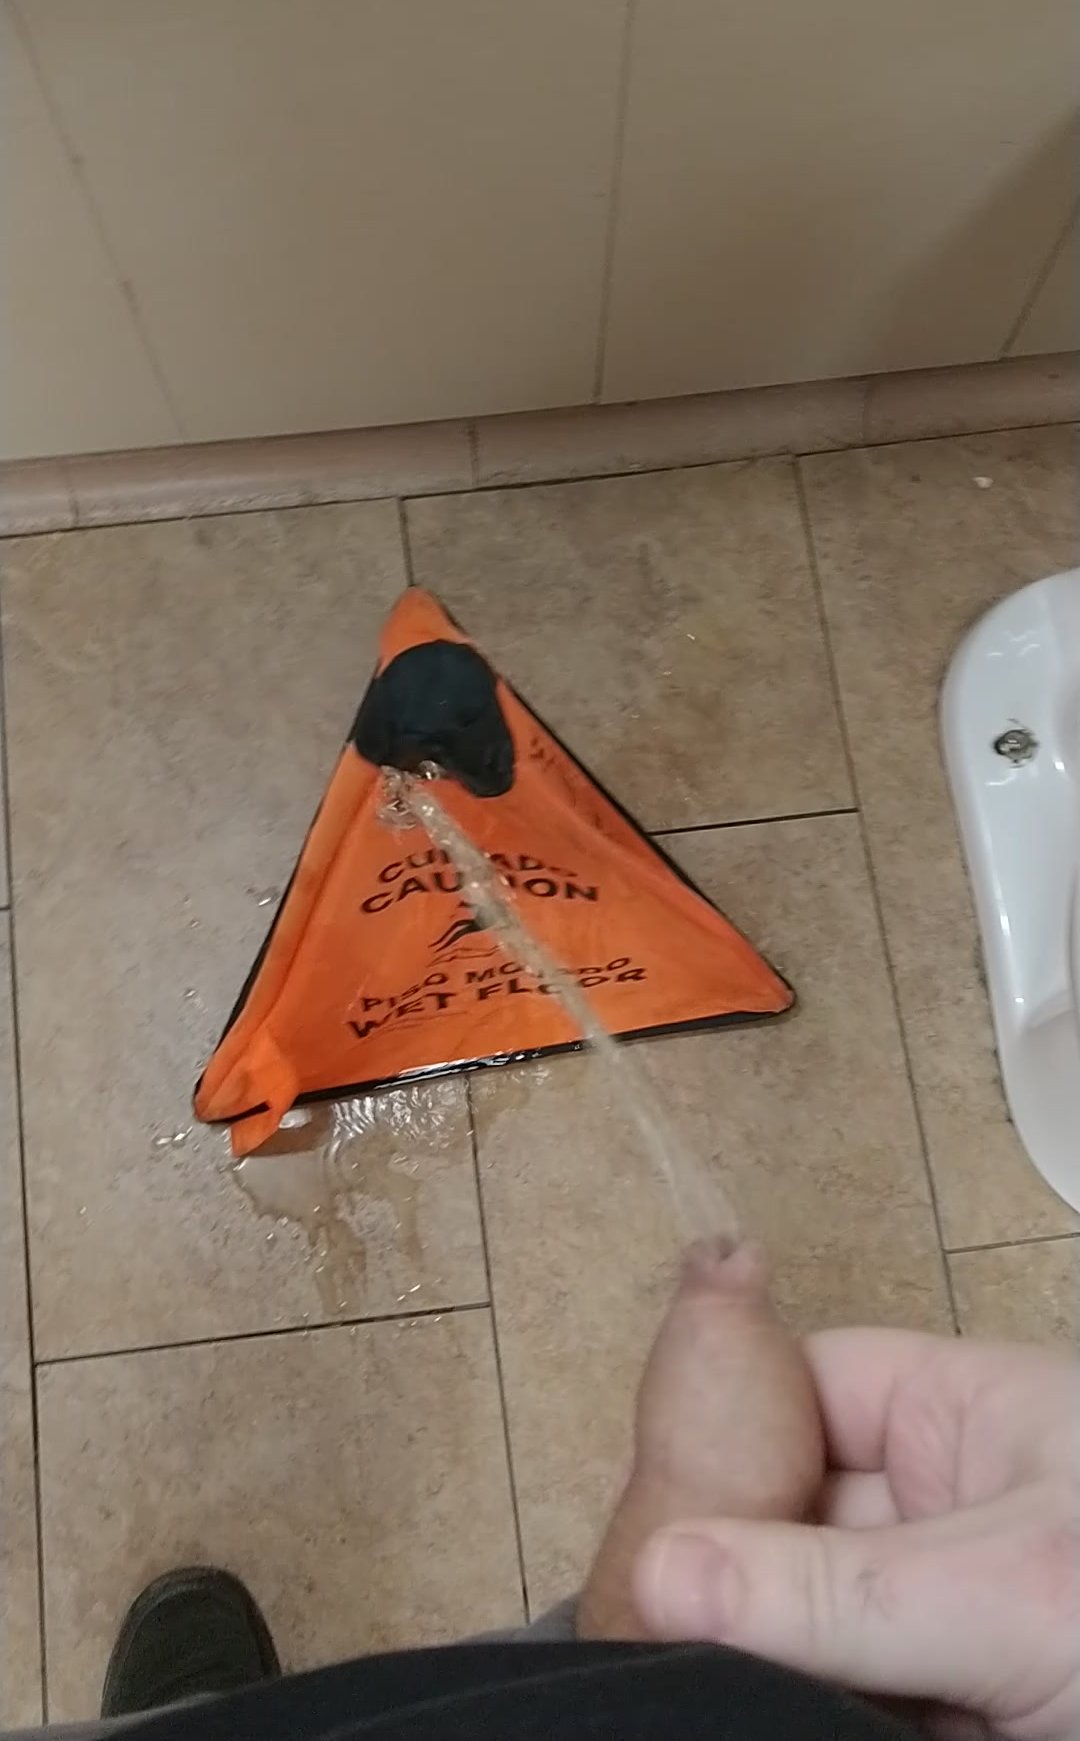 We're gonna need more wet floor signs, messy piss